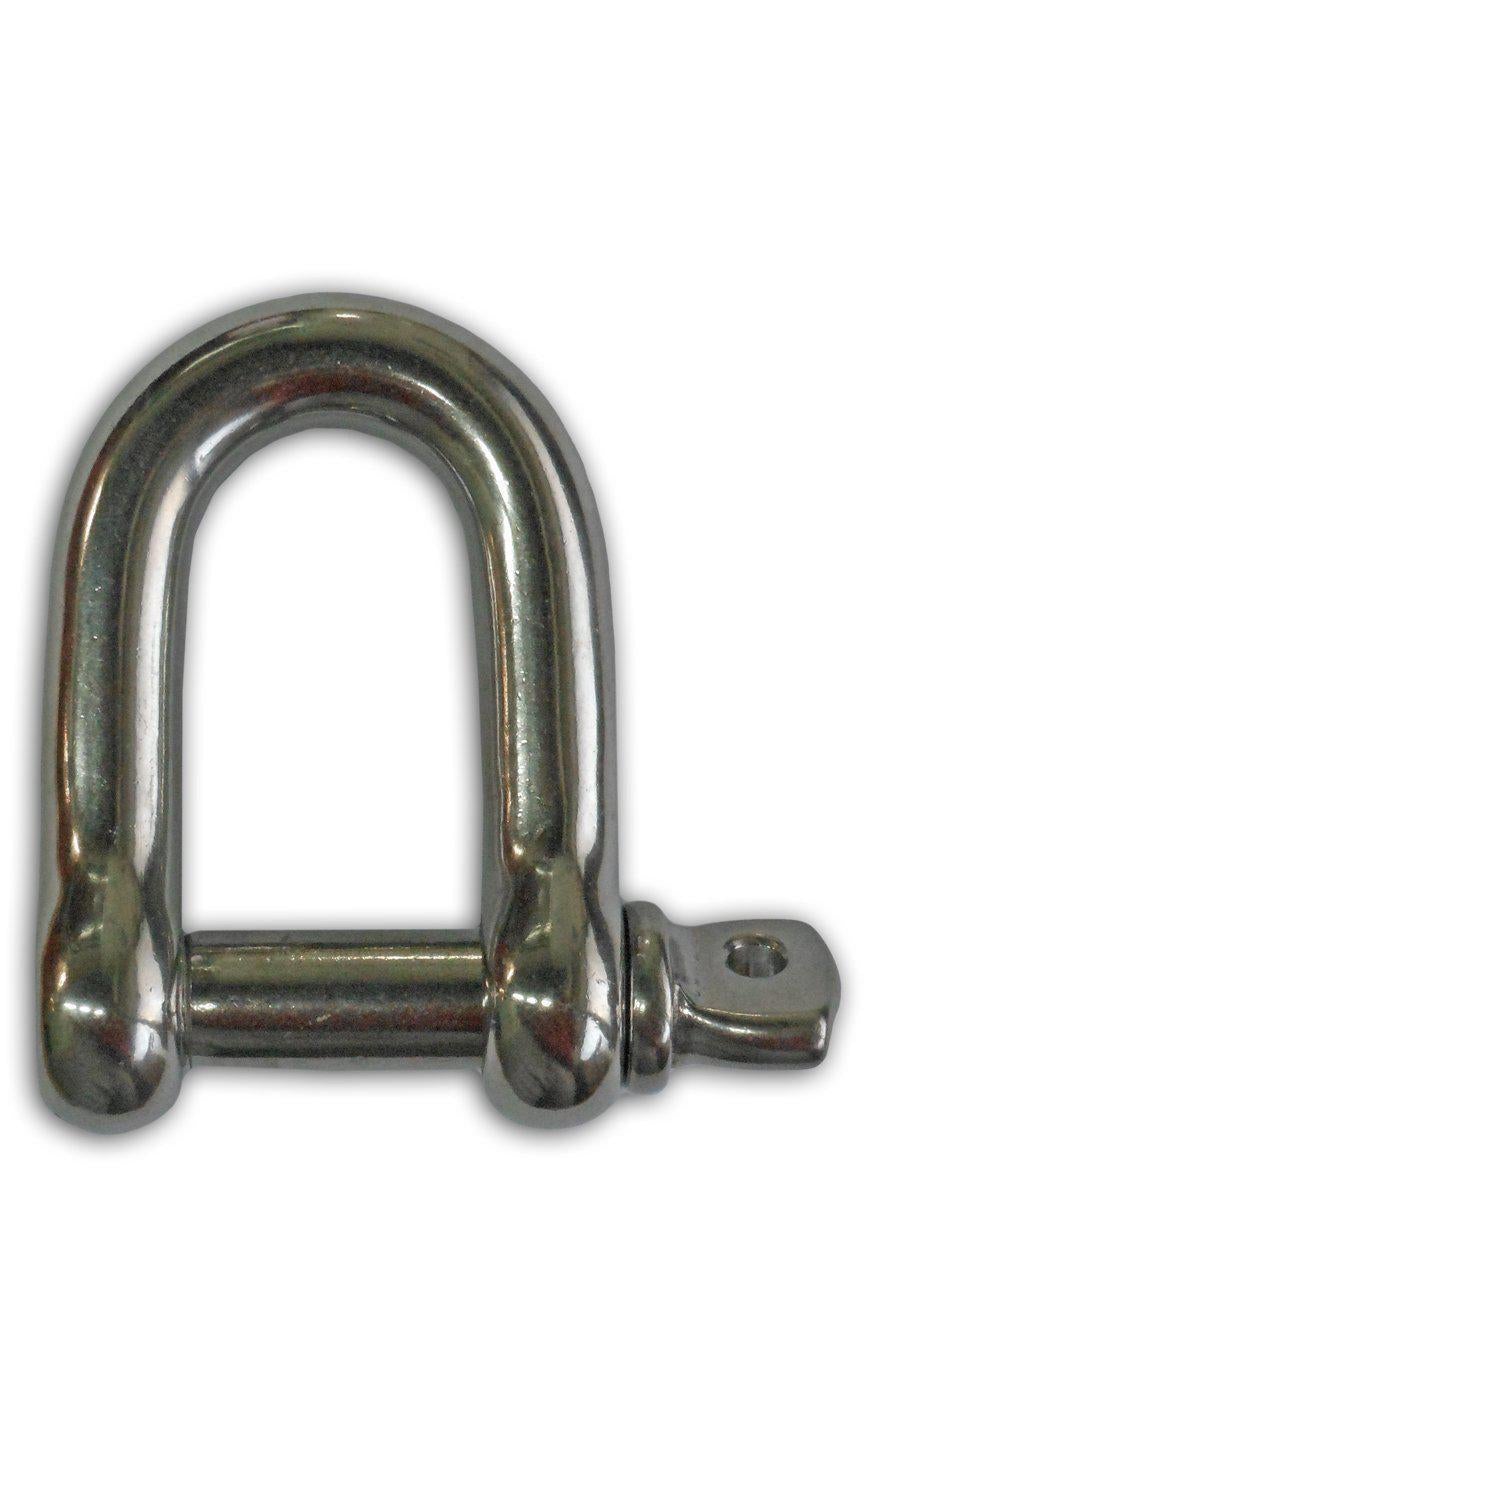 Captive Pin Chain D Type Rigging Shackle 5/16" (Set of 4)-Canadian Marine &amp; Outdoor Equipment